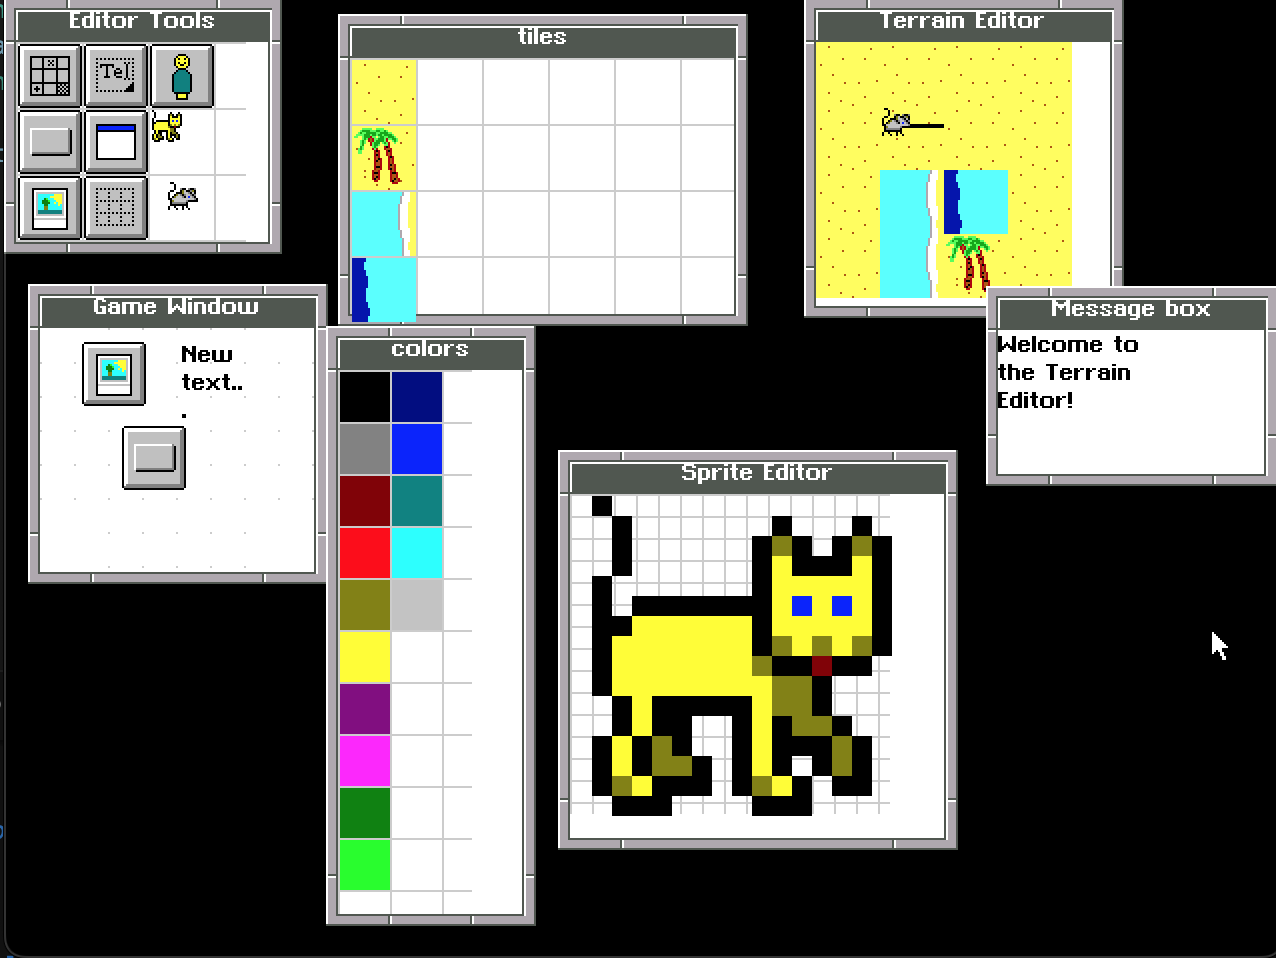 A game creation kit using the GeoWorks ensemble GUI skin for window frames, and the windows 3.1 grey icons for buttons.

Windows, clockwise from top-left:
Editor Tools: drag and drop these GUI elements into the Game Window. There is a Tile map tool, a Label tool, an NPC tool, a Button tool, a new Window tool, a cat-NPC tool, a mouse-NPC tool, an image tool and a grid tool.

Tiles: A tile window showing the available tile brushes to create a map with.

Terrain Editor: a tile map made using the tile brushes, with a little mouse on it.

Message box: a pop-up box that reads "Welcome to the Terrain Editor!"

Sprite Editor: A cat has been loaded into the sprite editor.

Colors: A palette of 16 default Windows 3.1 colours

Game Window: a sample game window, Visual Basic style, showing a clickable button, a text label, and an image loaded.